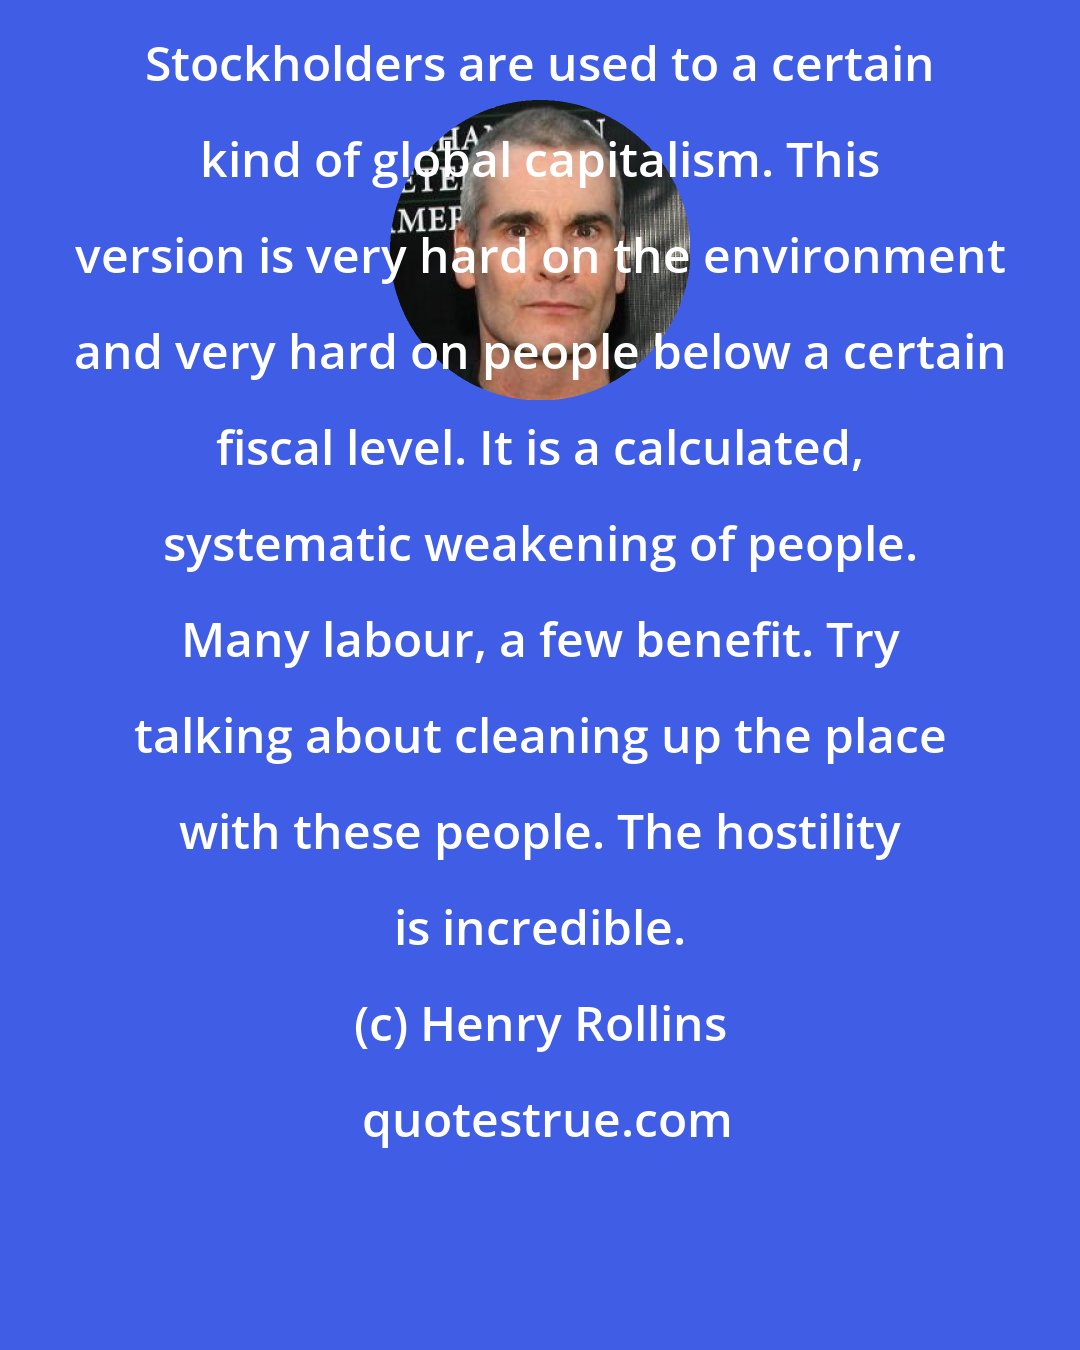 Henry Rollins: Stockholders are used to a certain kind of global capitalism. This version is very hard on the environment and very hard on people below a certain fiscal level. It is a calculated, systematic weakening of people. Many labour, a few benefit. Try talking about cleaning up the place with these people. The hostility is incredible.